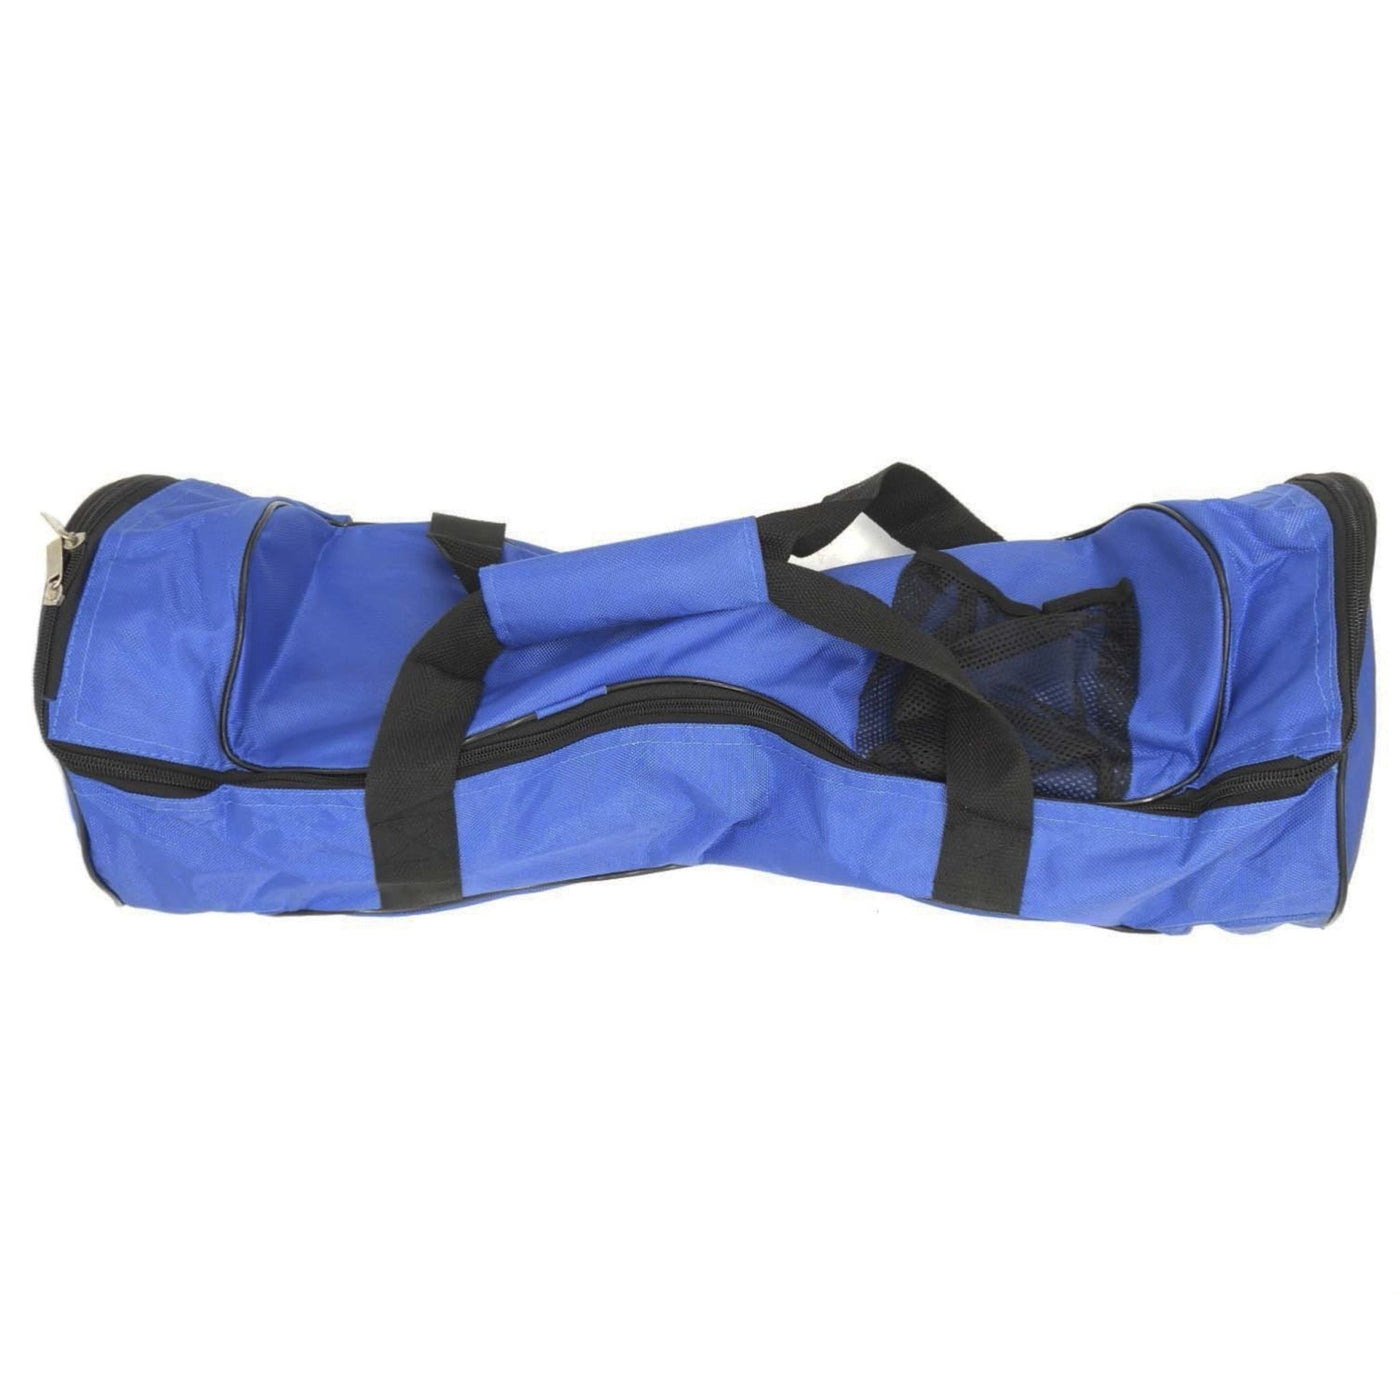 GOTRAX Hoverboard Carrying Bag for Gotrax and Non-Gotrax Hoverboards - GOTRAX